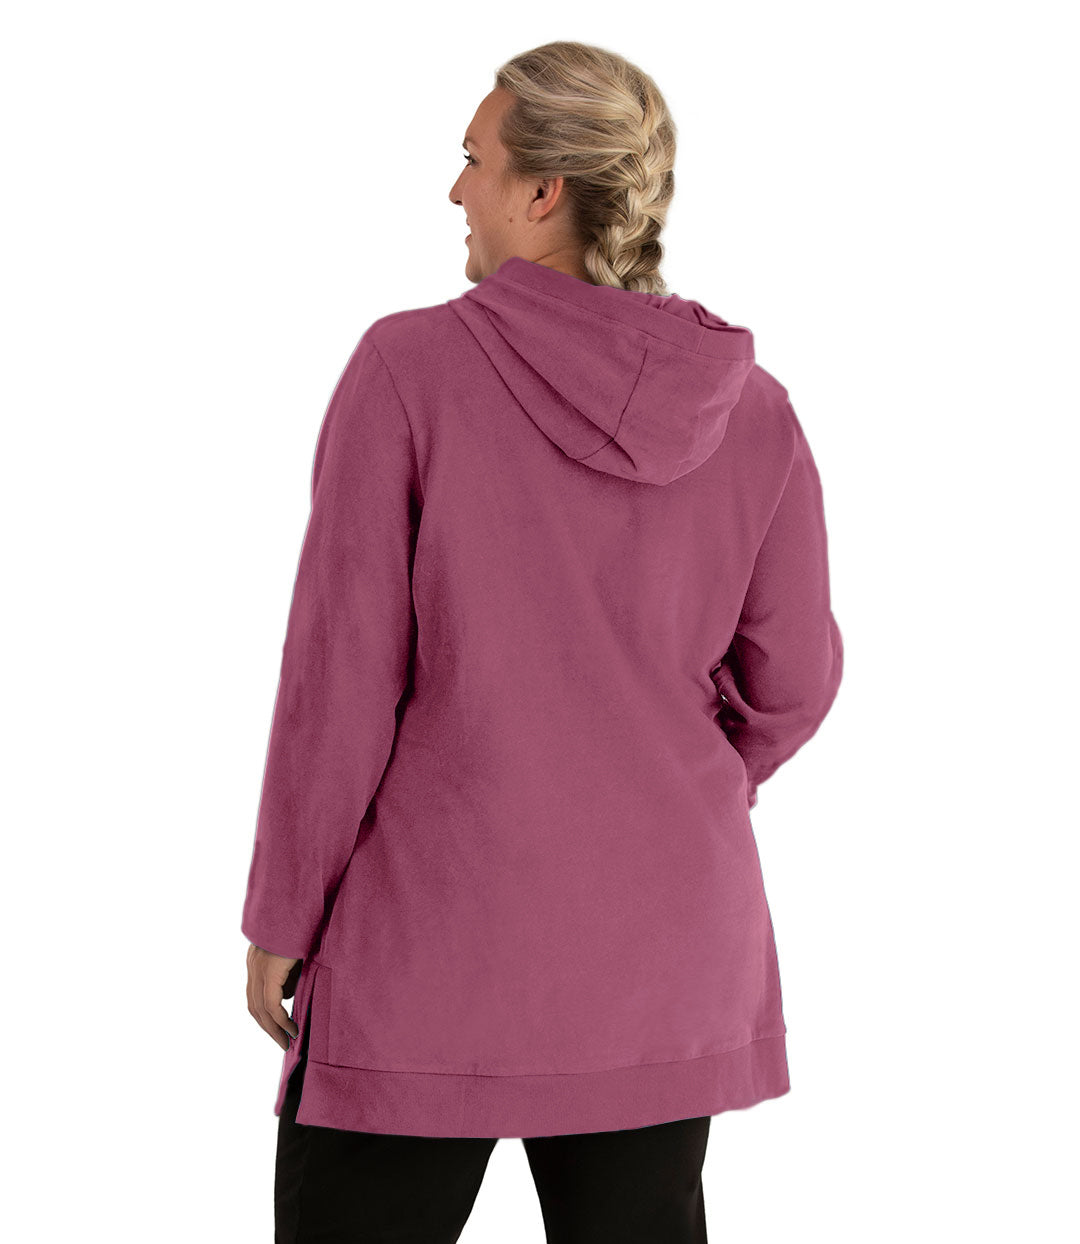 Plus size woman, facing back looking left, wearing JunoActive plus size Legacy Cotton Casual Pullover V-Neck Hoodie in the color Dusty Rose. She is wearing JunoActive Plus Size Leggings in the color Black.